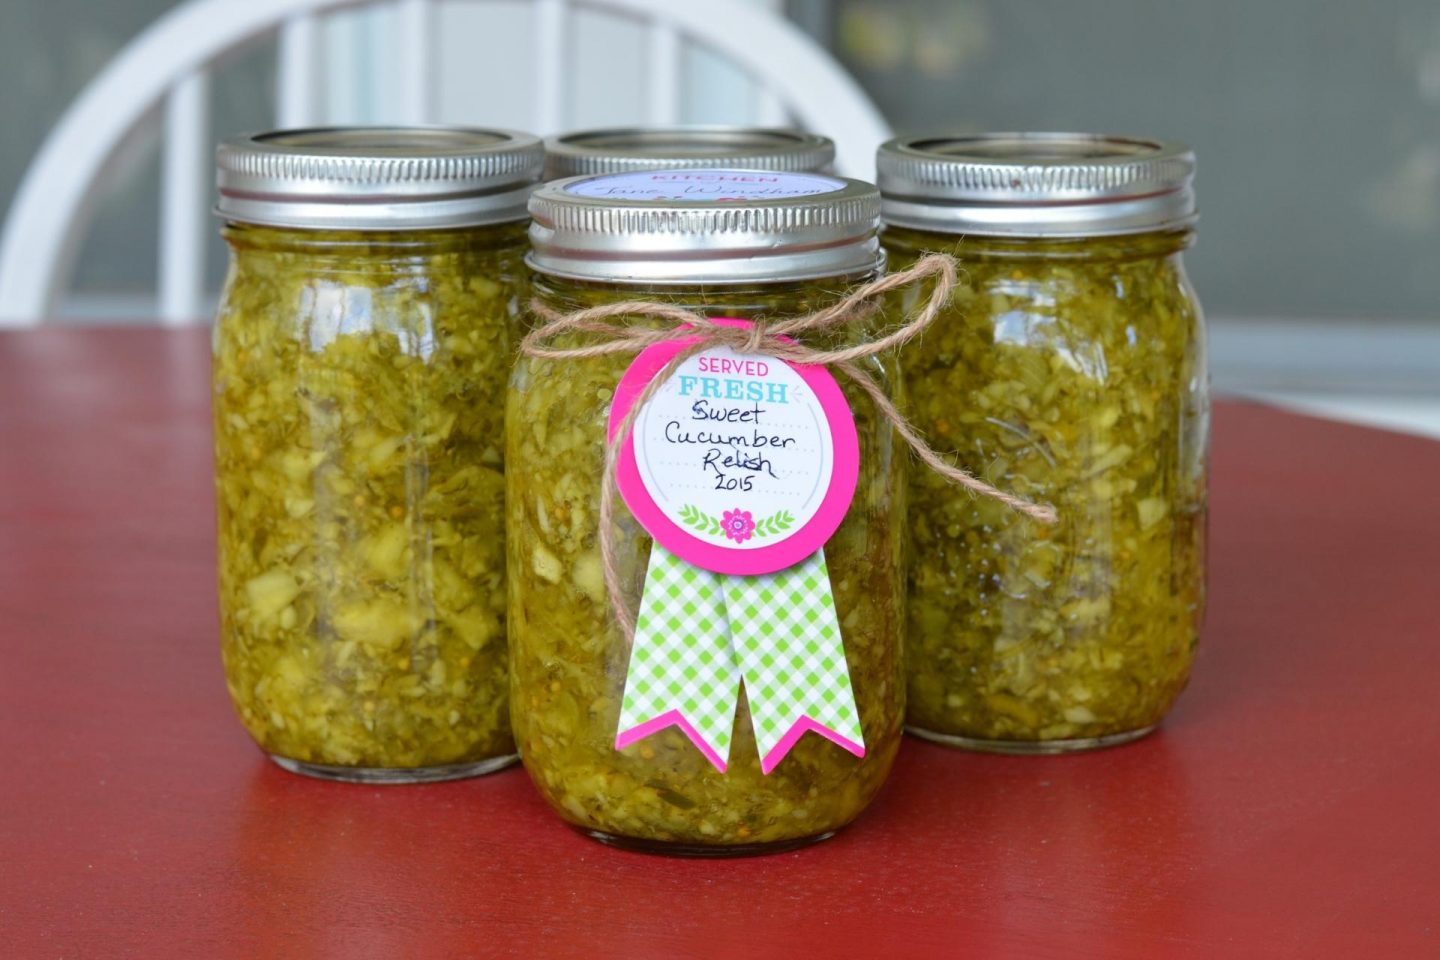 Packed cucumber relish